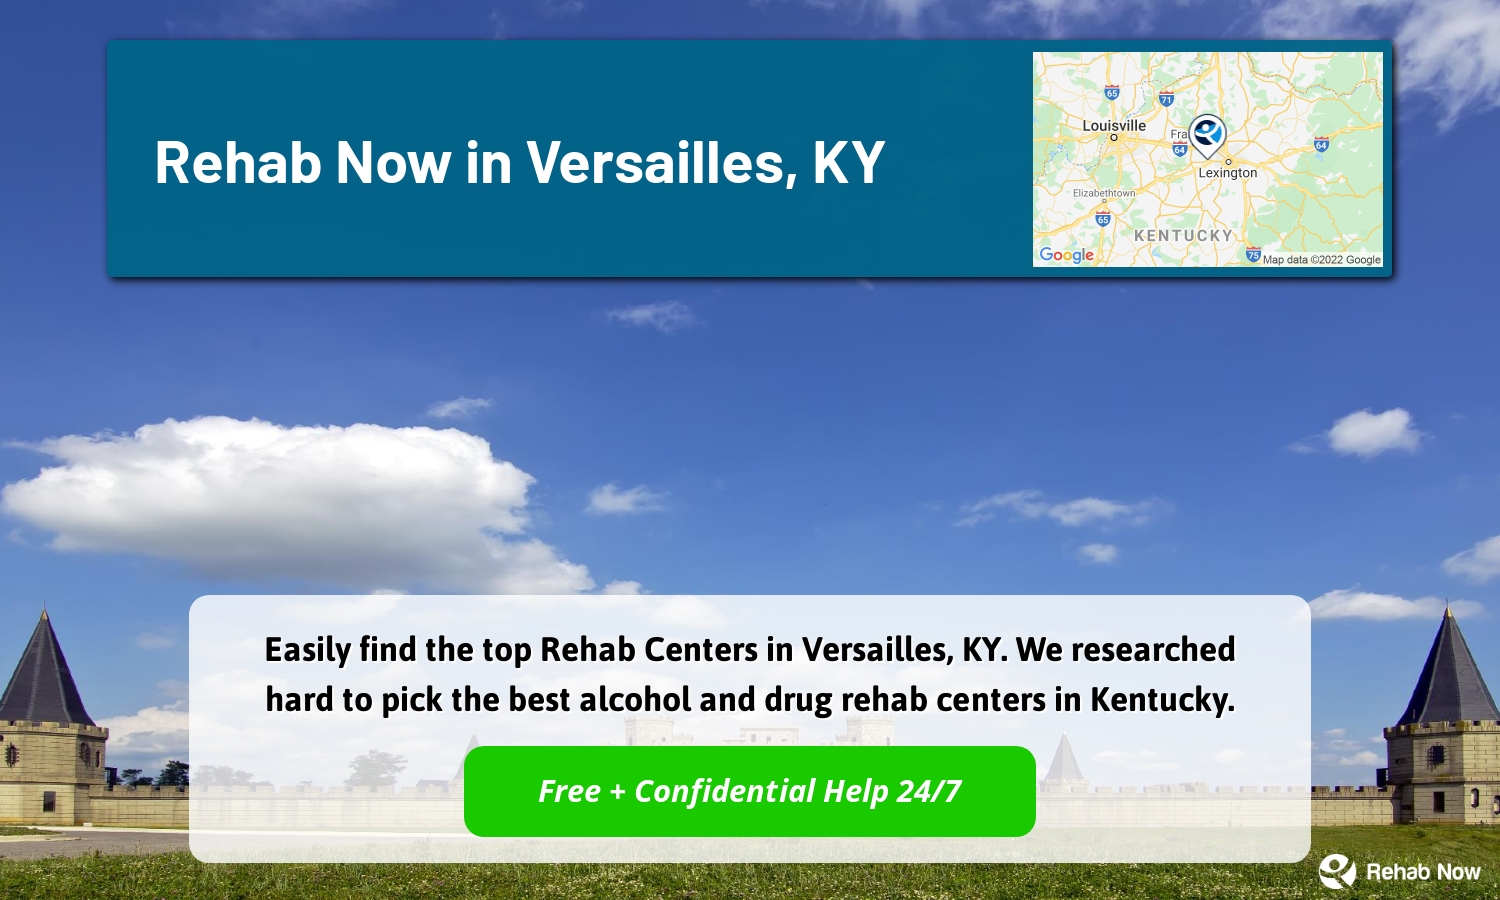 Easily find the top Rehab Centers in Versailles, KY. We researched hard to pick the best alcohol and drug rehab centers in Kentucky.